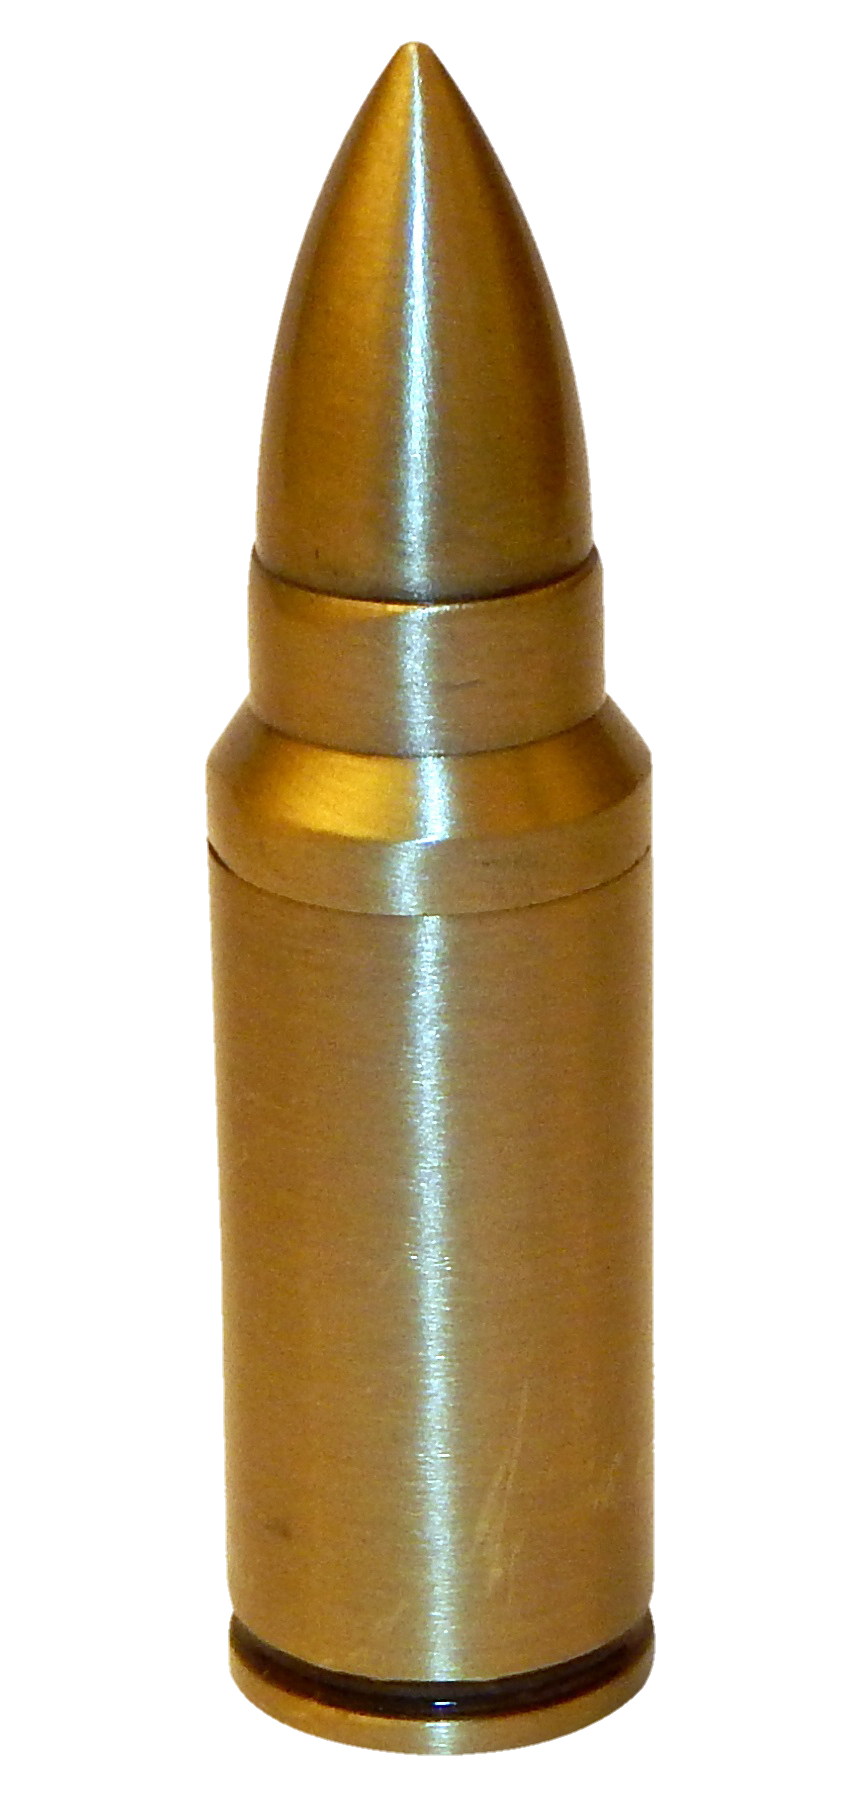 bullet-png-from-pngfre-29